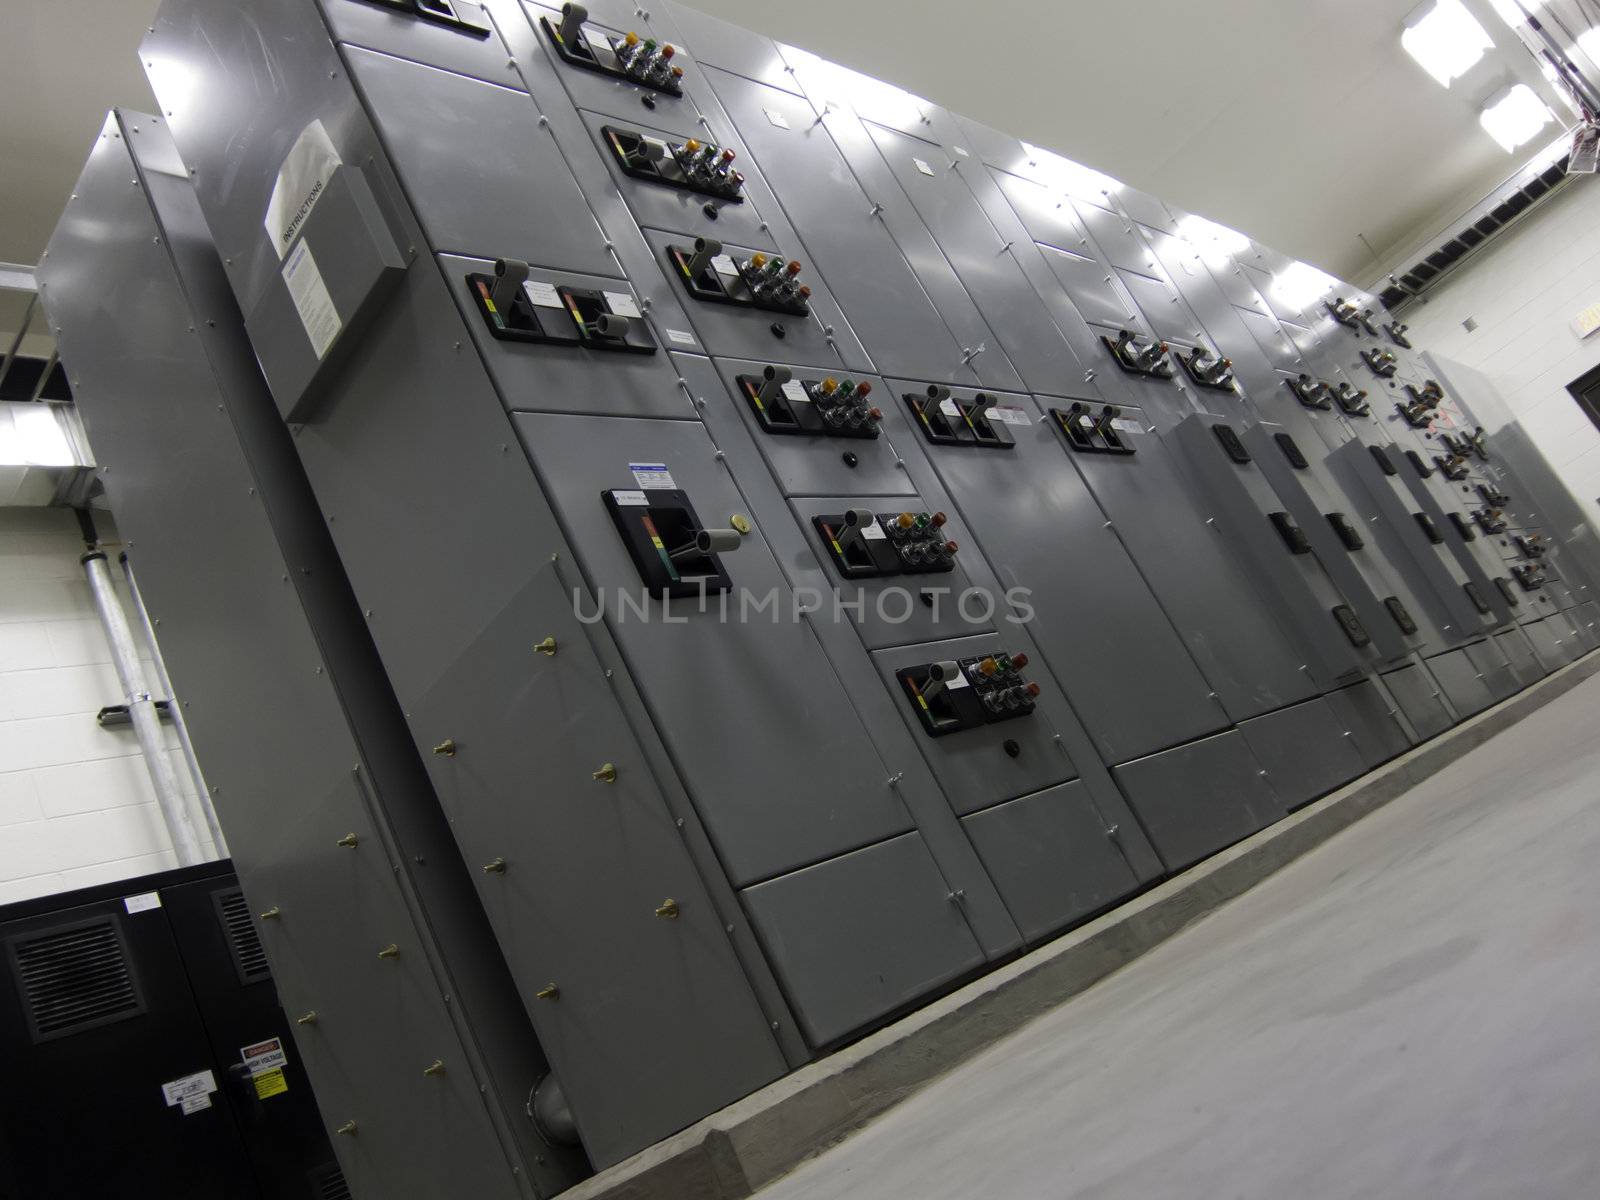 electrical panel in electrical room by kjcimagery